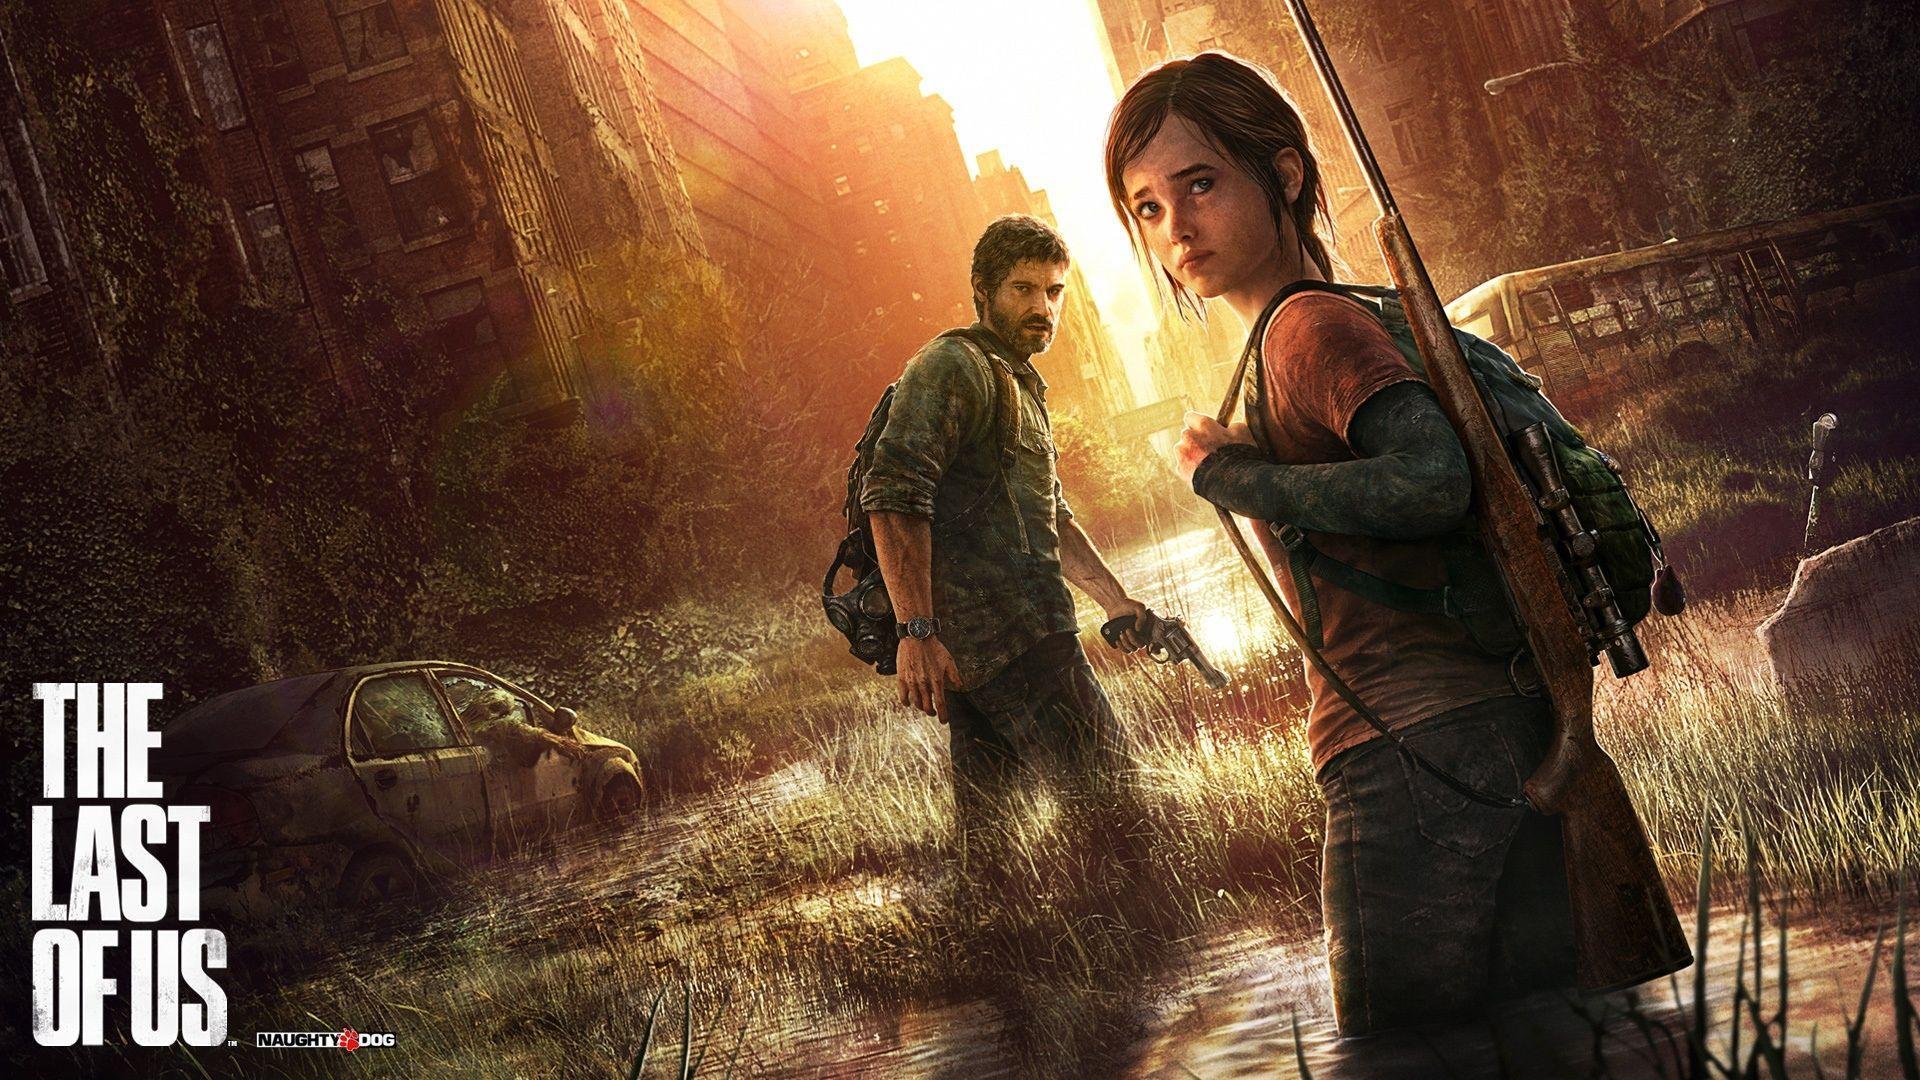 The Last Of Us Tv Series Fanart 4k Wallpaper,HD Tv Shows Wallpapers,4k  Wallpapers,Images,Backgrounds,Photos and Pictures